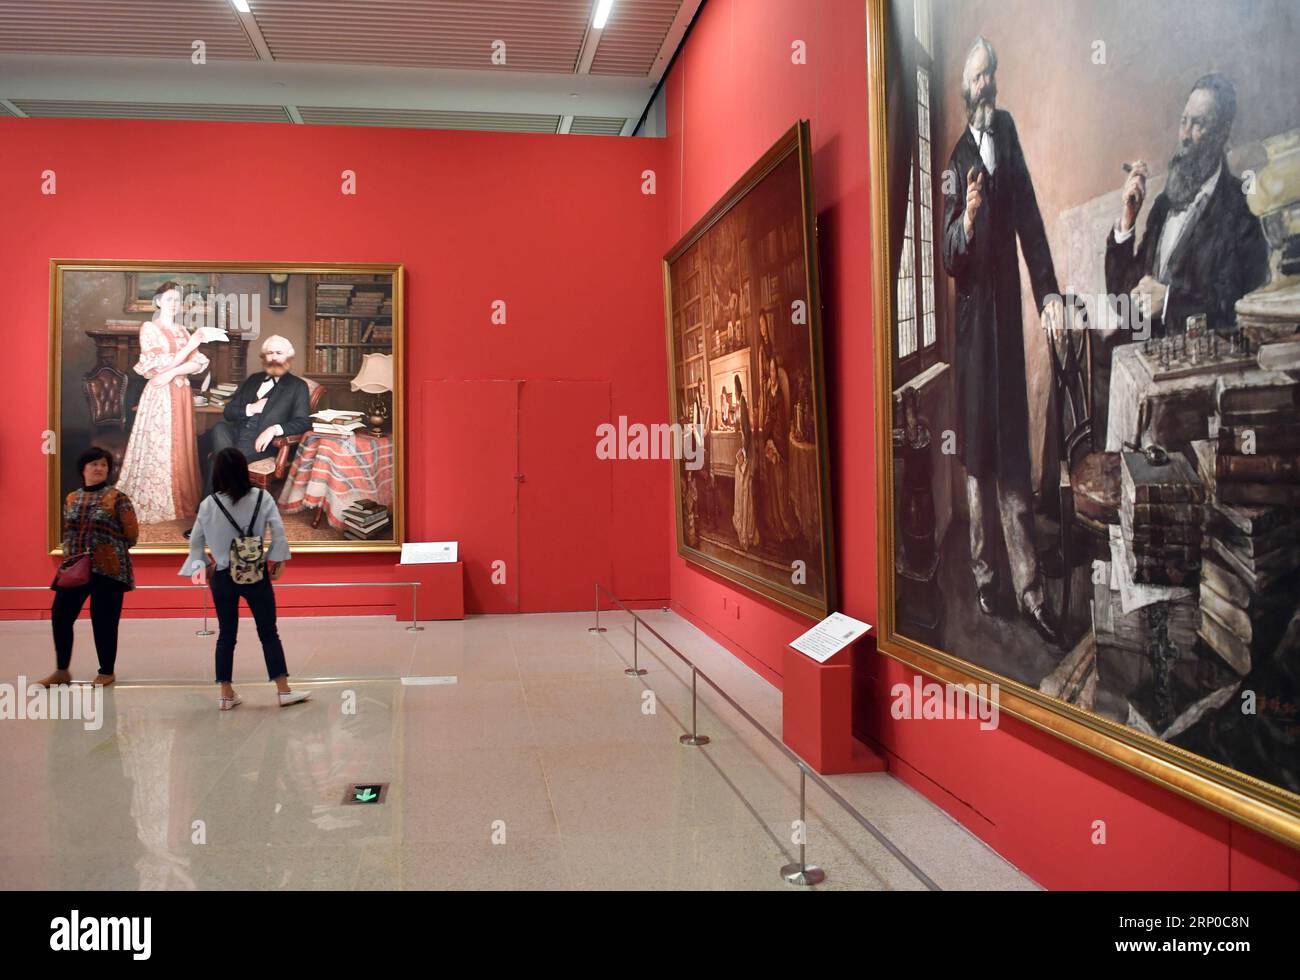 (180505) -- BEIJING, May 5, 2018 -- People look at Marxism-themed contemporary art pieces displayed at The Power of Truth , an exhibition marking the 200th anniversary of Karl Marx s birth, at the National Museum of China in Beijing, capital of China, May 5, 2018. The exhibition was opened here on Saturday. It features Marx s life, sinicized Marxism and Marxism-themed contemporary art. ) (lmm) CHINA-BEIJING-KARL MARX-ANNIVERSARY-EXHIBITION (CN) JinxLiangkuai PUBLICATIONxNOTxINxCHN Stock Photo